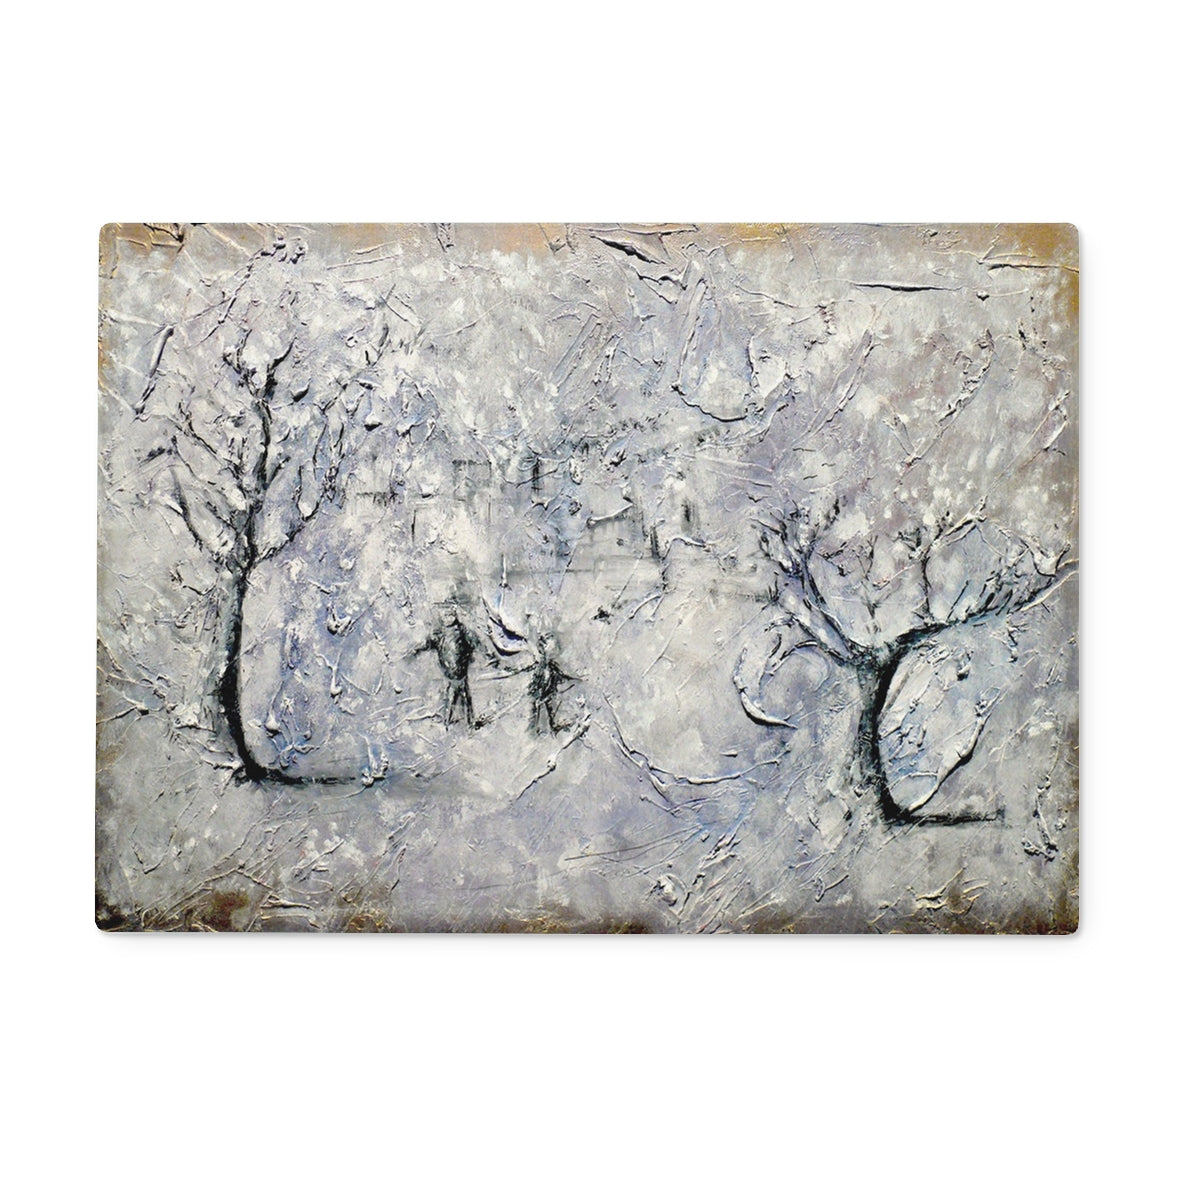 Father Daughter Snow Art Gifts Glass Chopping Board-Glass Chopping Boards-Abstract & Impressionistic Art Gallery-15"x11" Rectangular-Paintings, Prints, Homeware, Art Gifts From Scotland By Scottish Artist Kevin Hunter